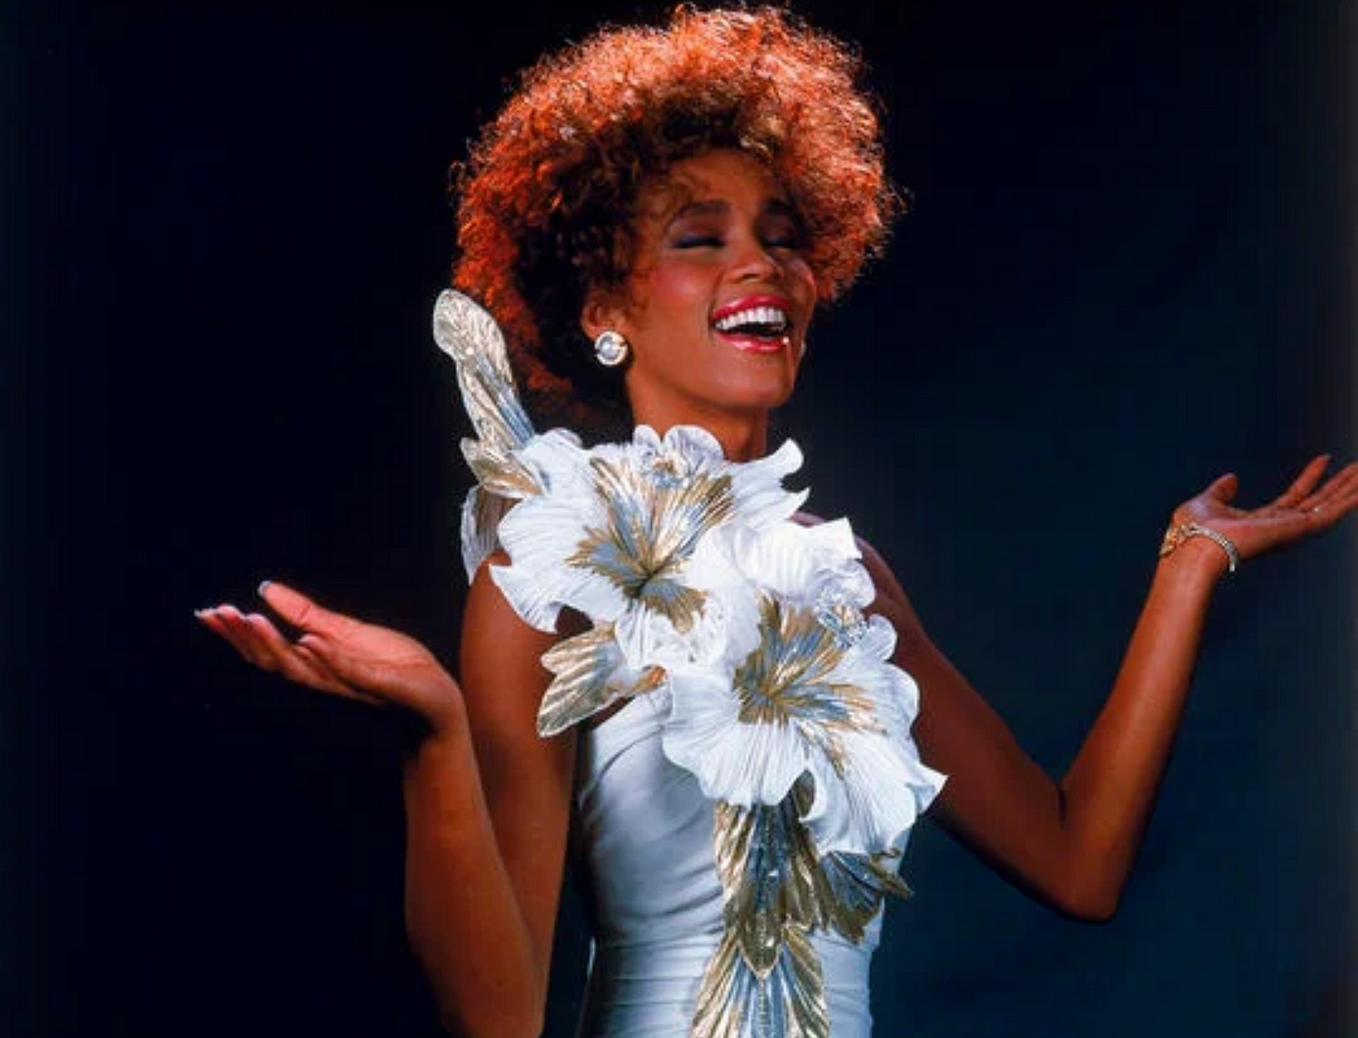 Sarah Jessica Parker wore this dress in the opening scene of the 2008 Sex and The City movie, but it was originally designed for Whitney, who wore it in a 1987 promotional photoshoot.